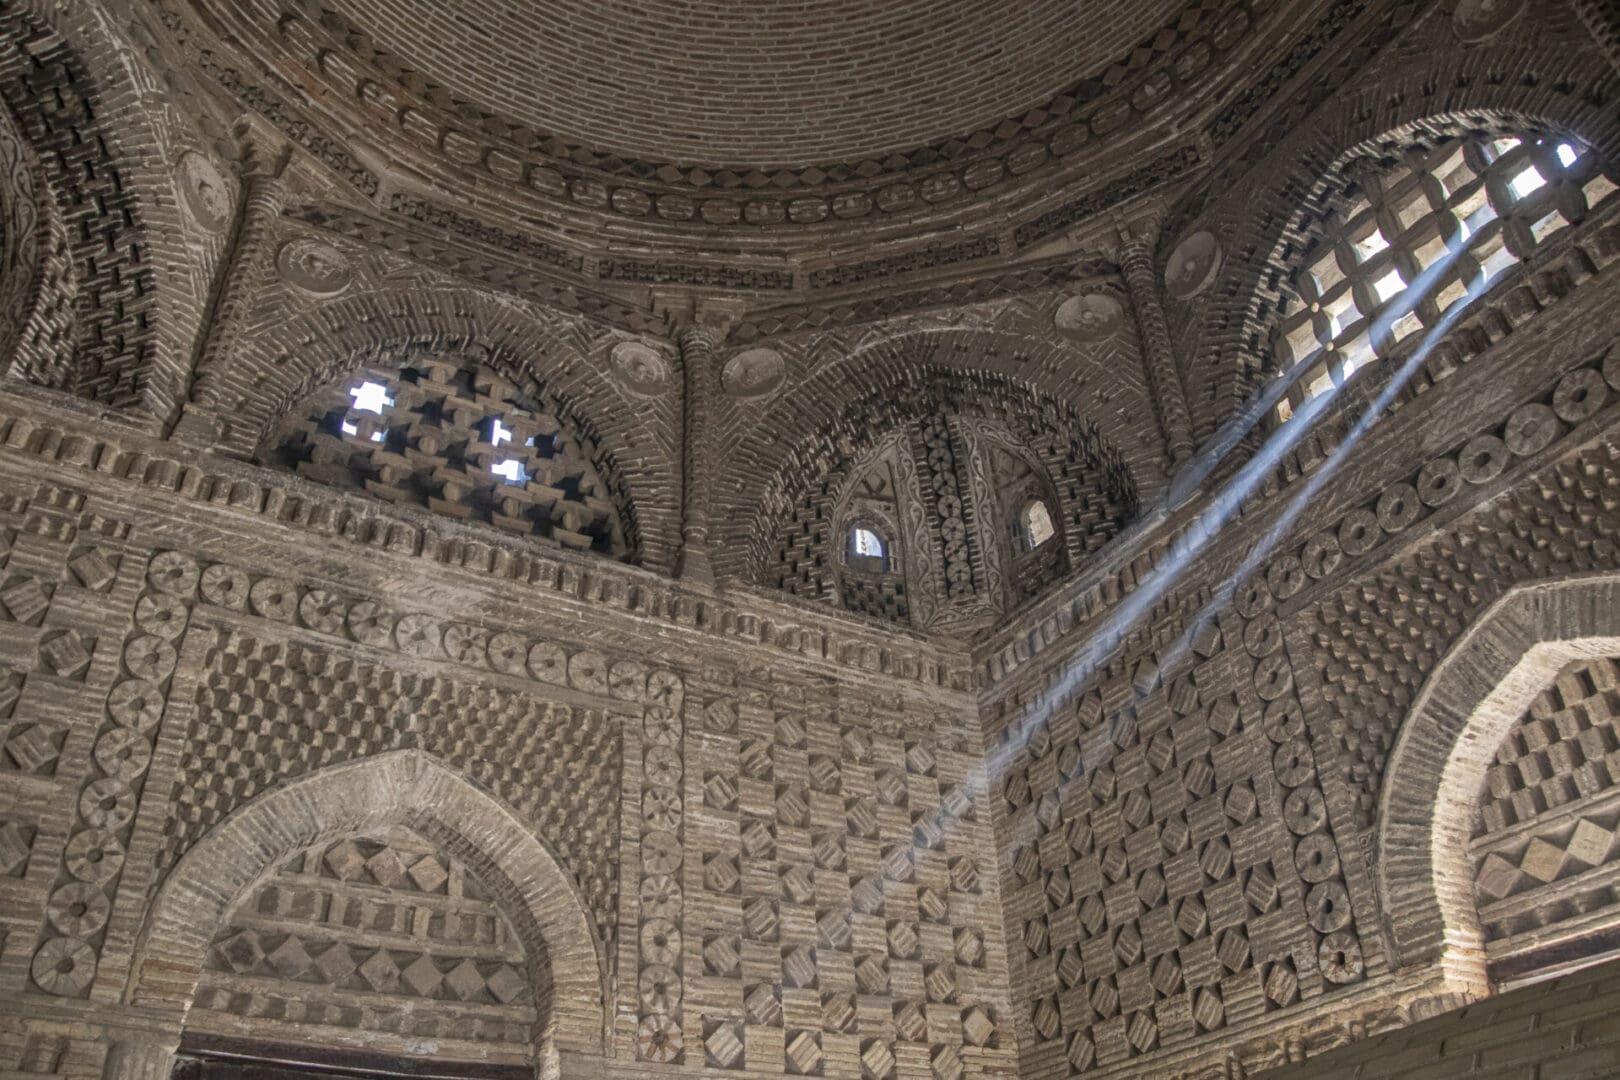 The inside of an ornate building with a light shining through the windows.